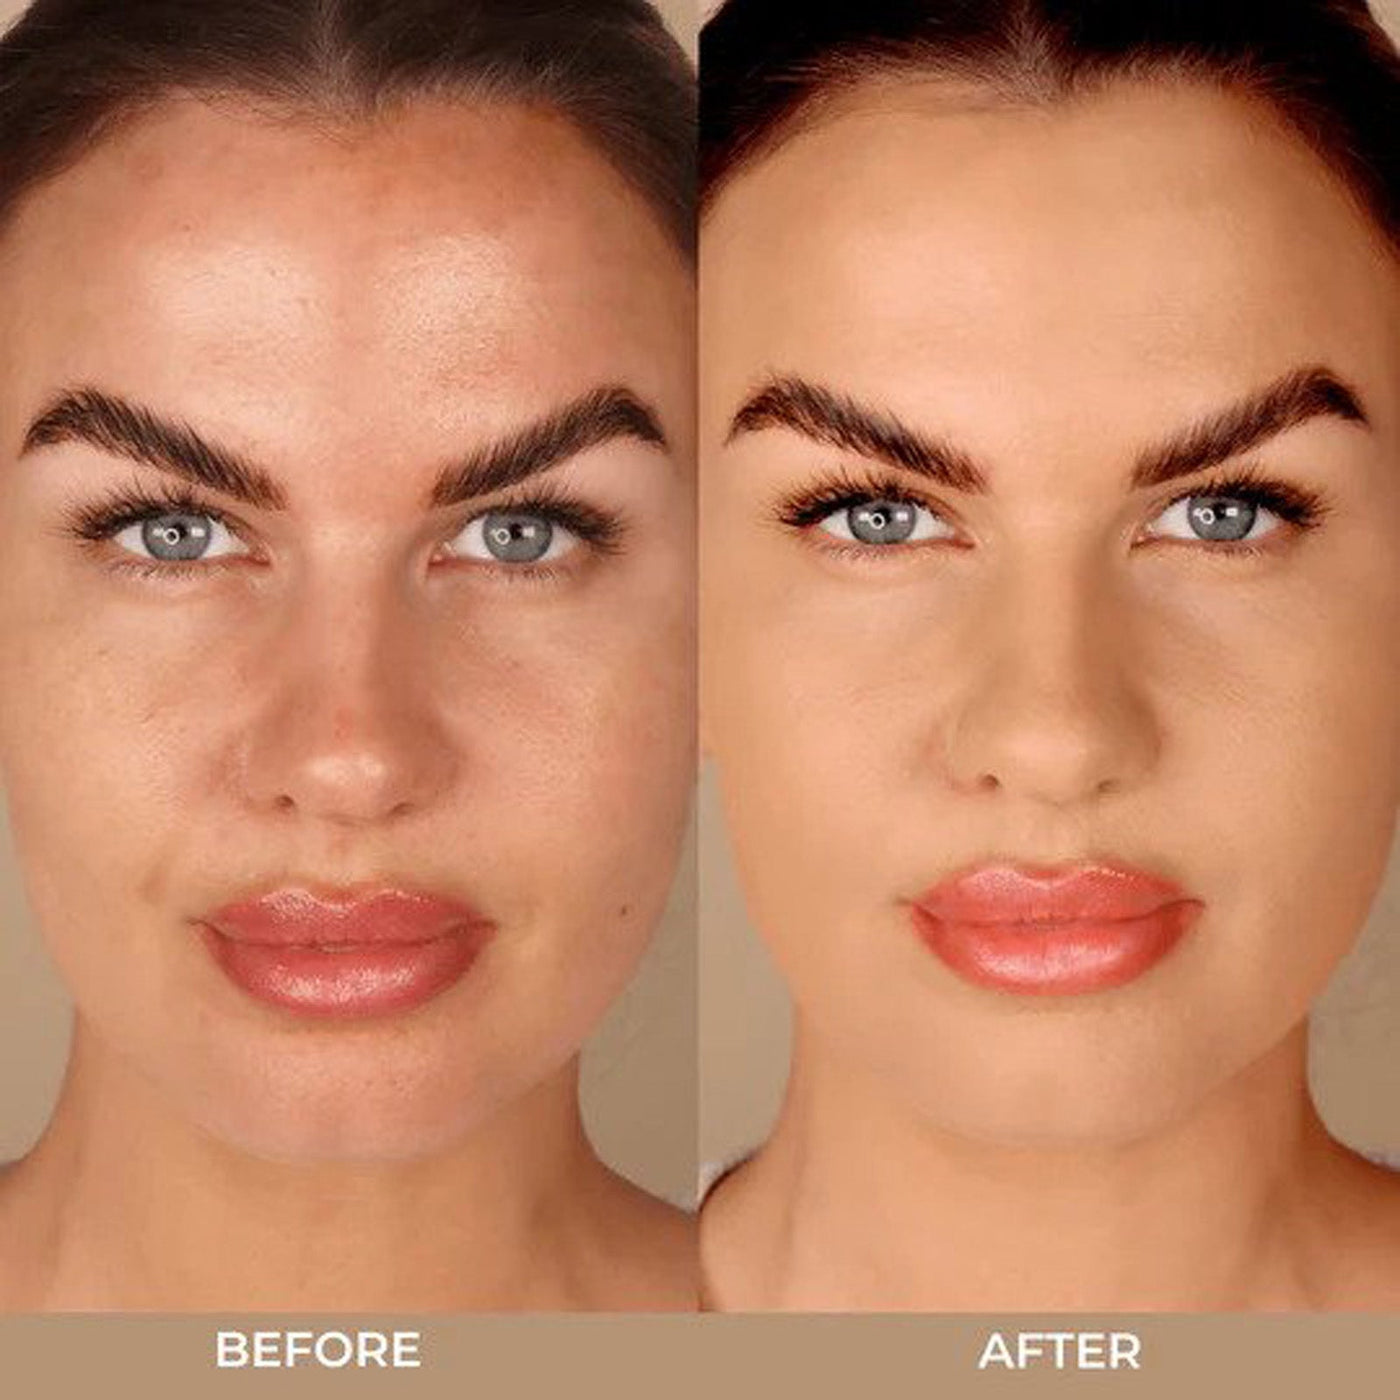 VANI-T Skin Perfector HD Serum Foundation (35ml) before and after use